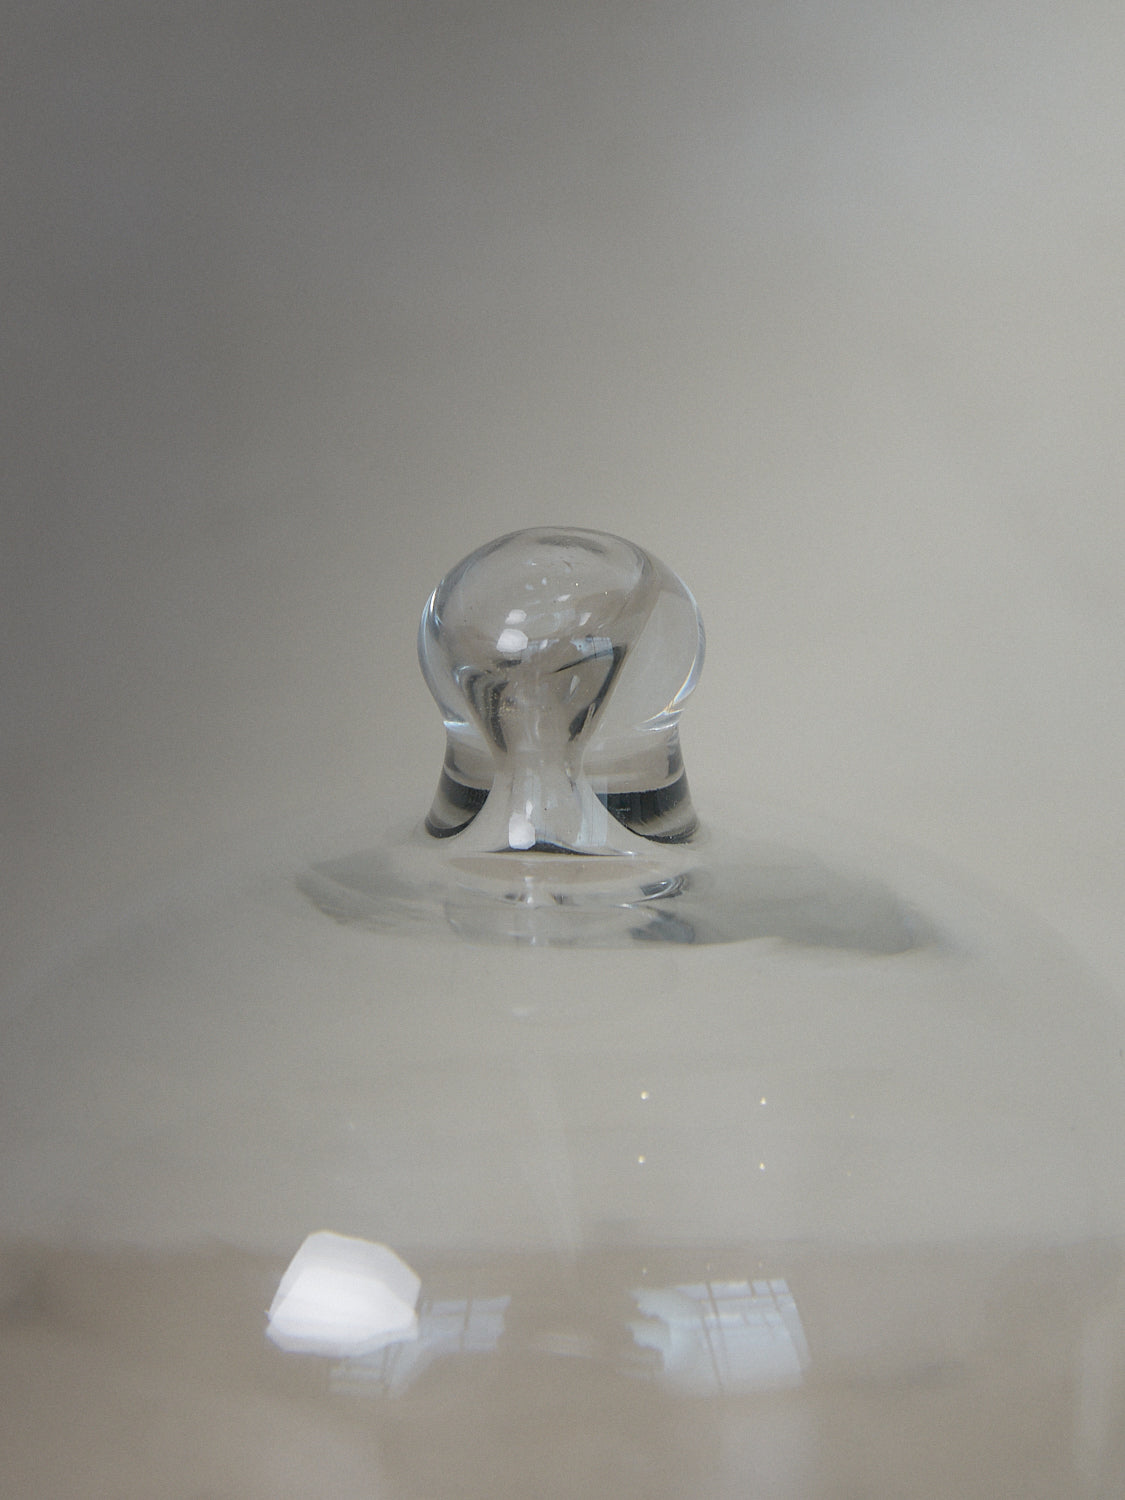 Glass Cloche. Decorative dome shaped glass cloche candle cover designed to protect candle when not in use